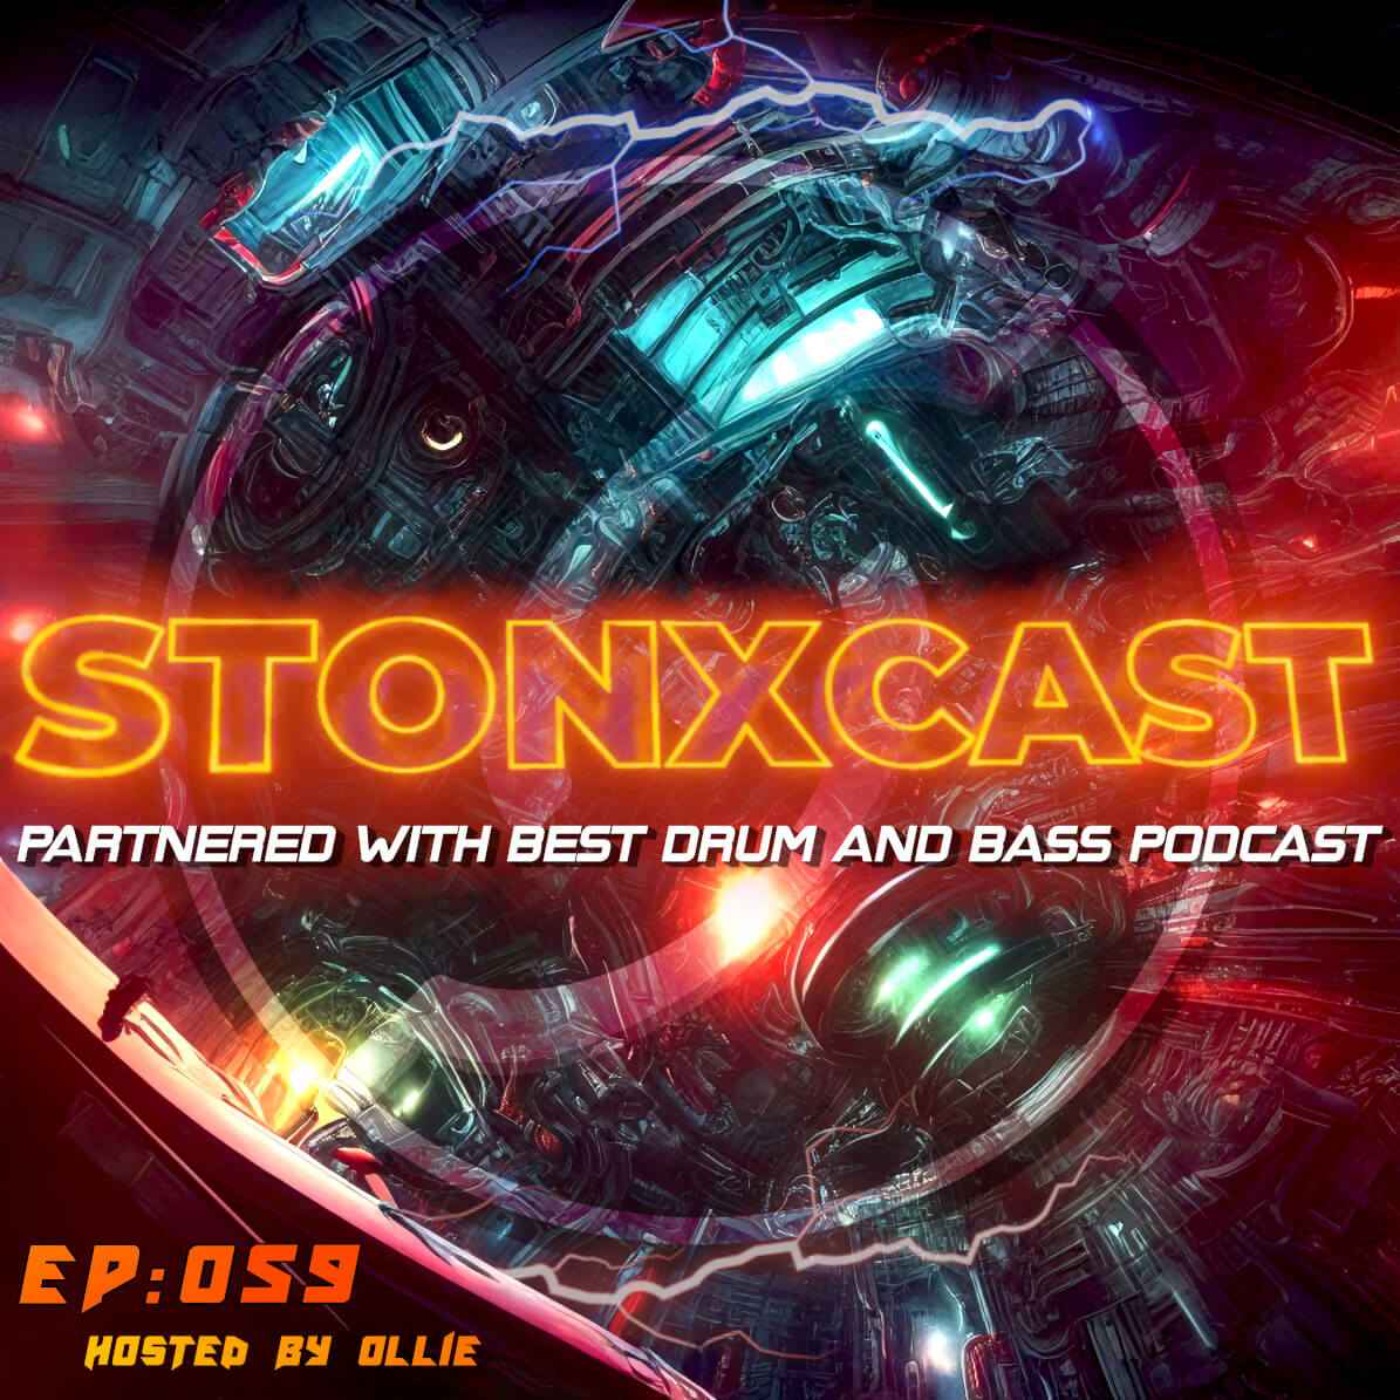 Stonxcast EP:059 - Hosted by Ollie Artwork